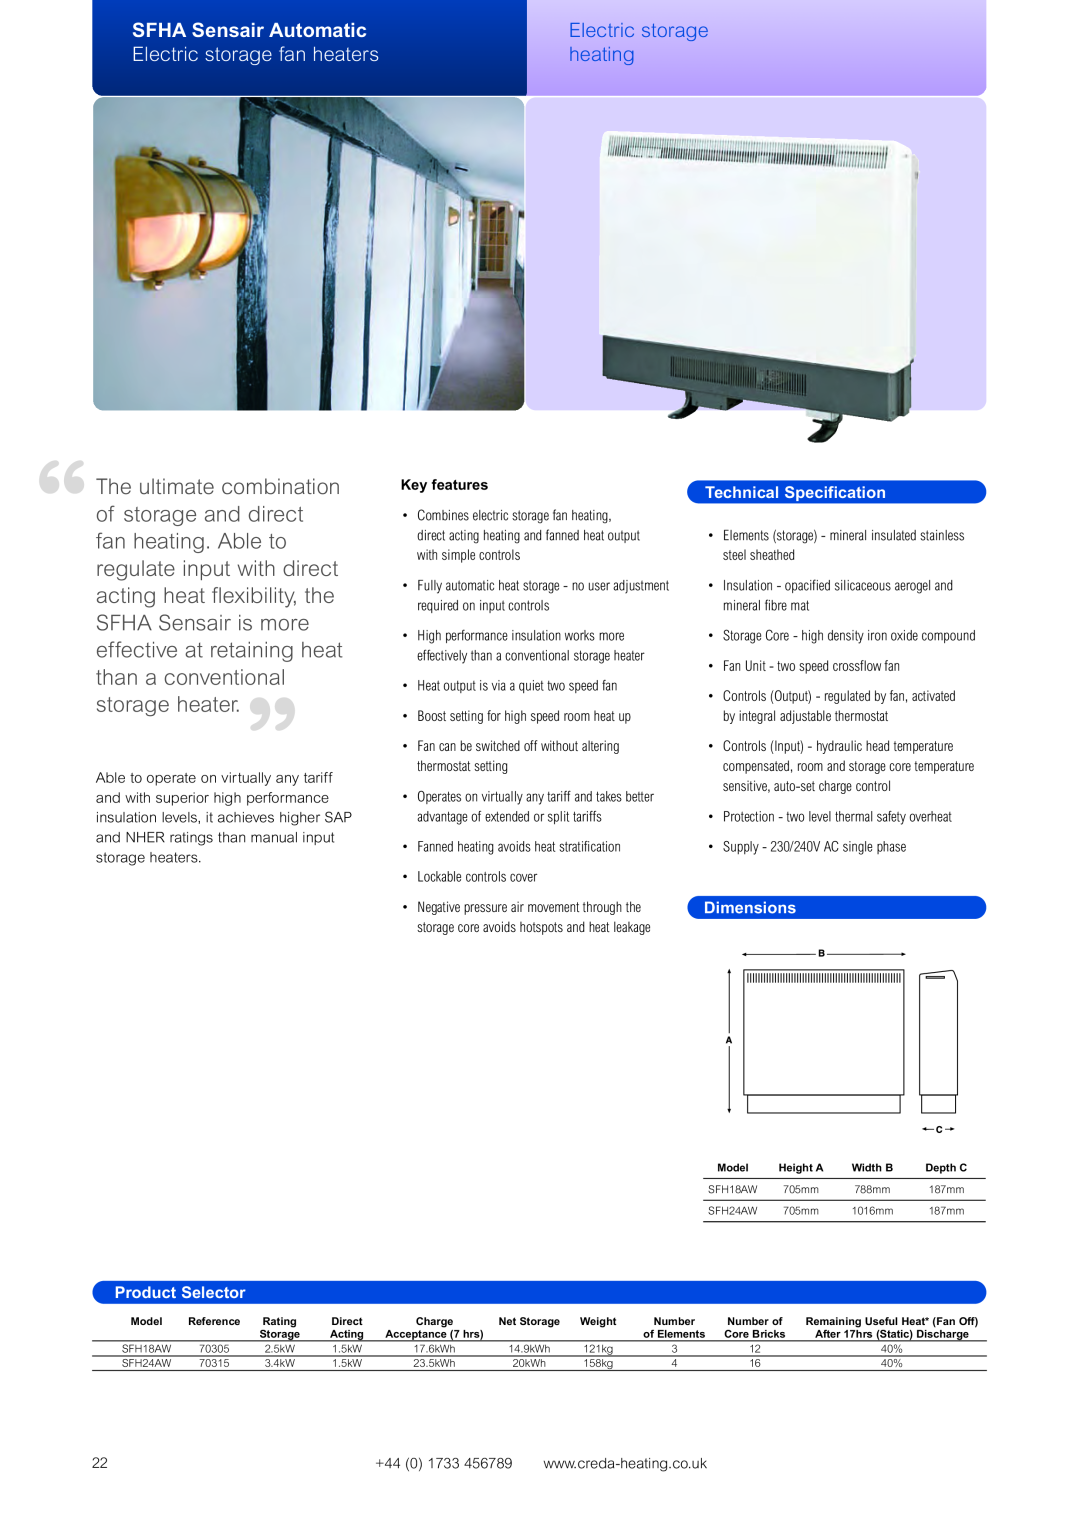 Creda Heating Solution manual SFHA Sensair Automatic, Electric storage fan heaters, heating, Technical Specification 